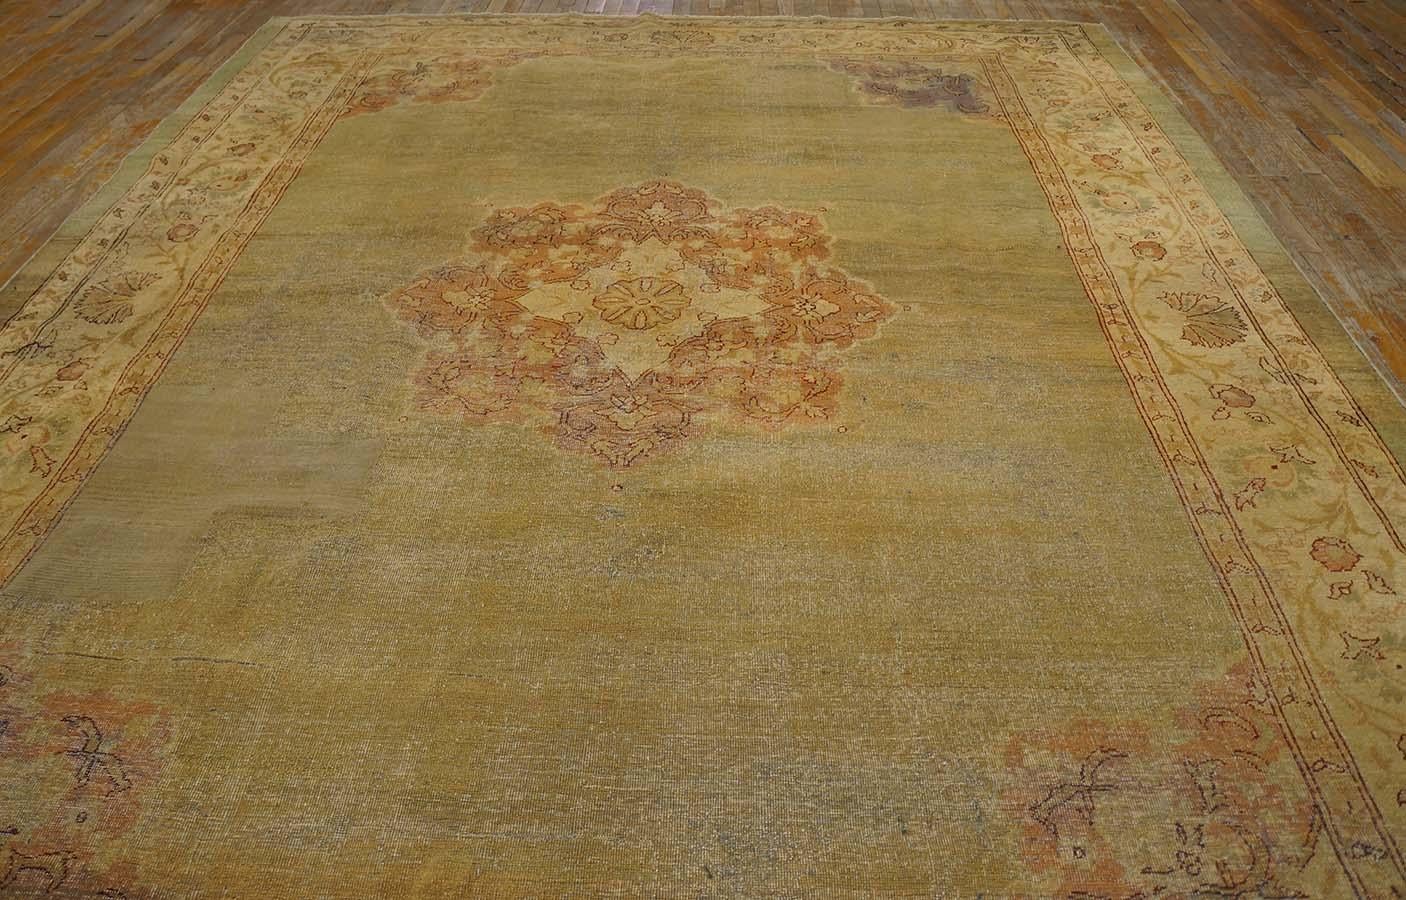 Hand-Knotted Early 20th Century N. Indian Amritsar Carpet ( 9'2